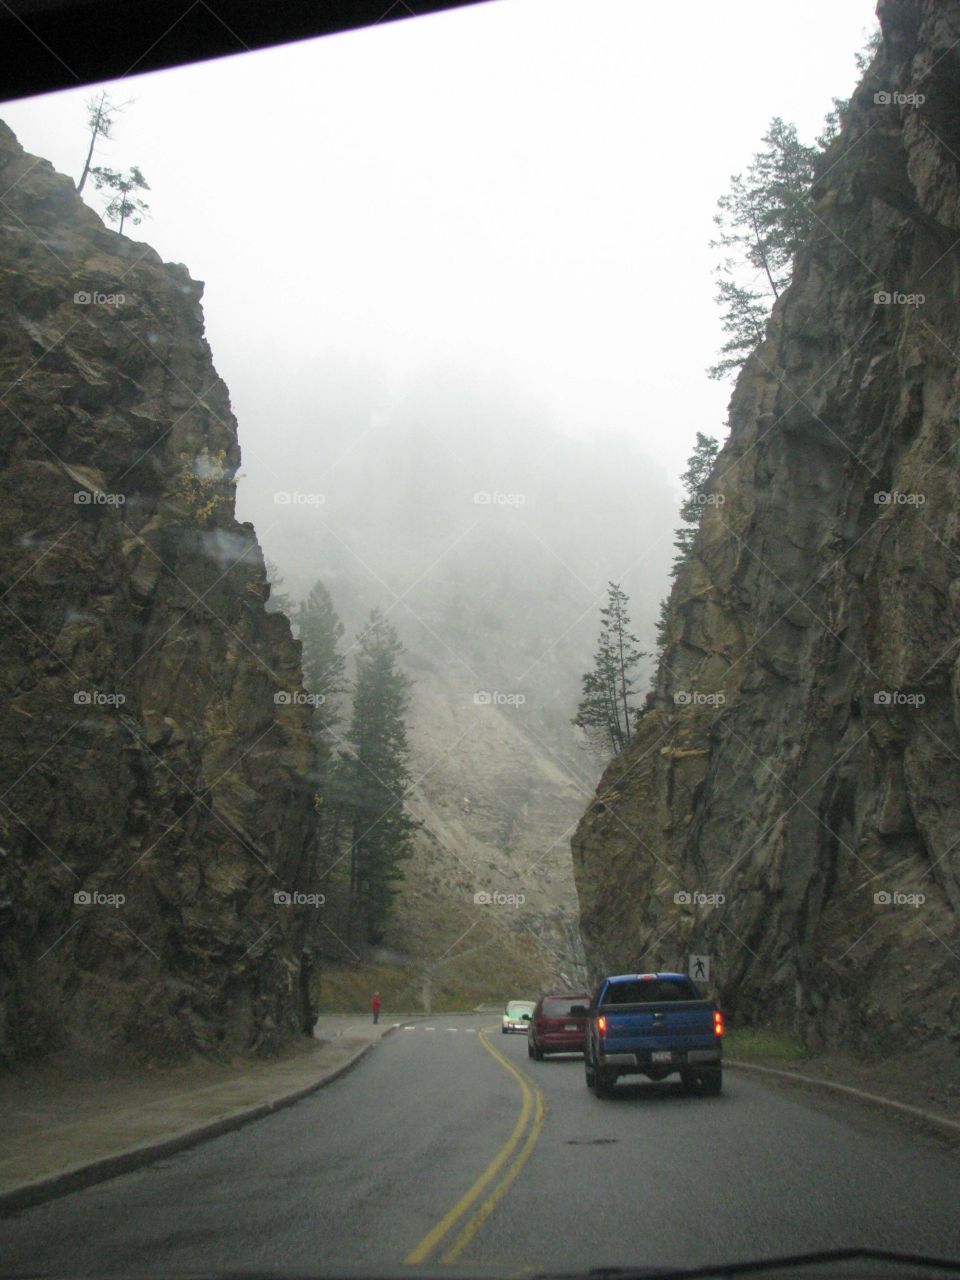 On the road between cliffs 